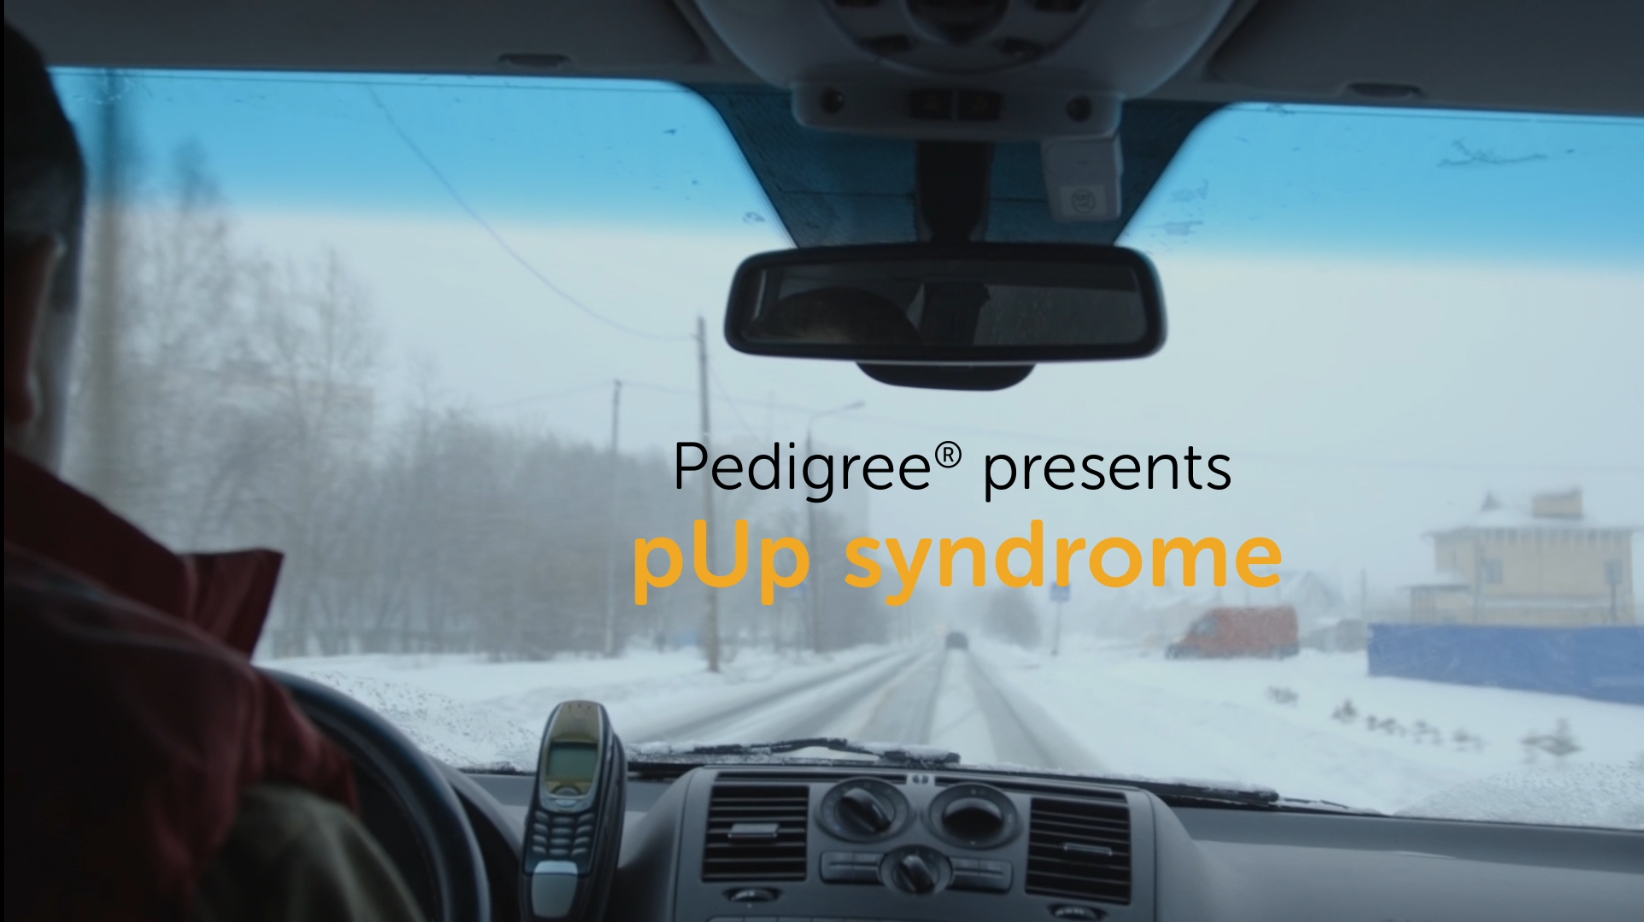 PUP SYNDROME